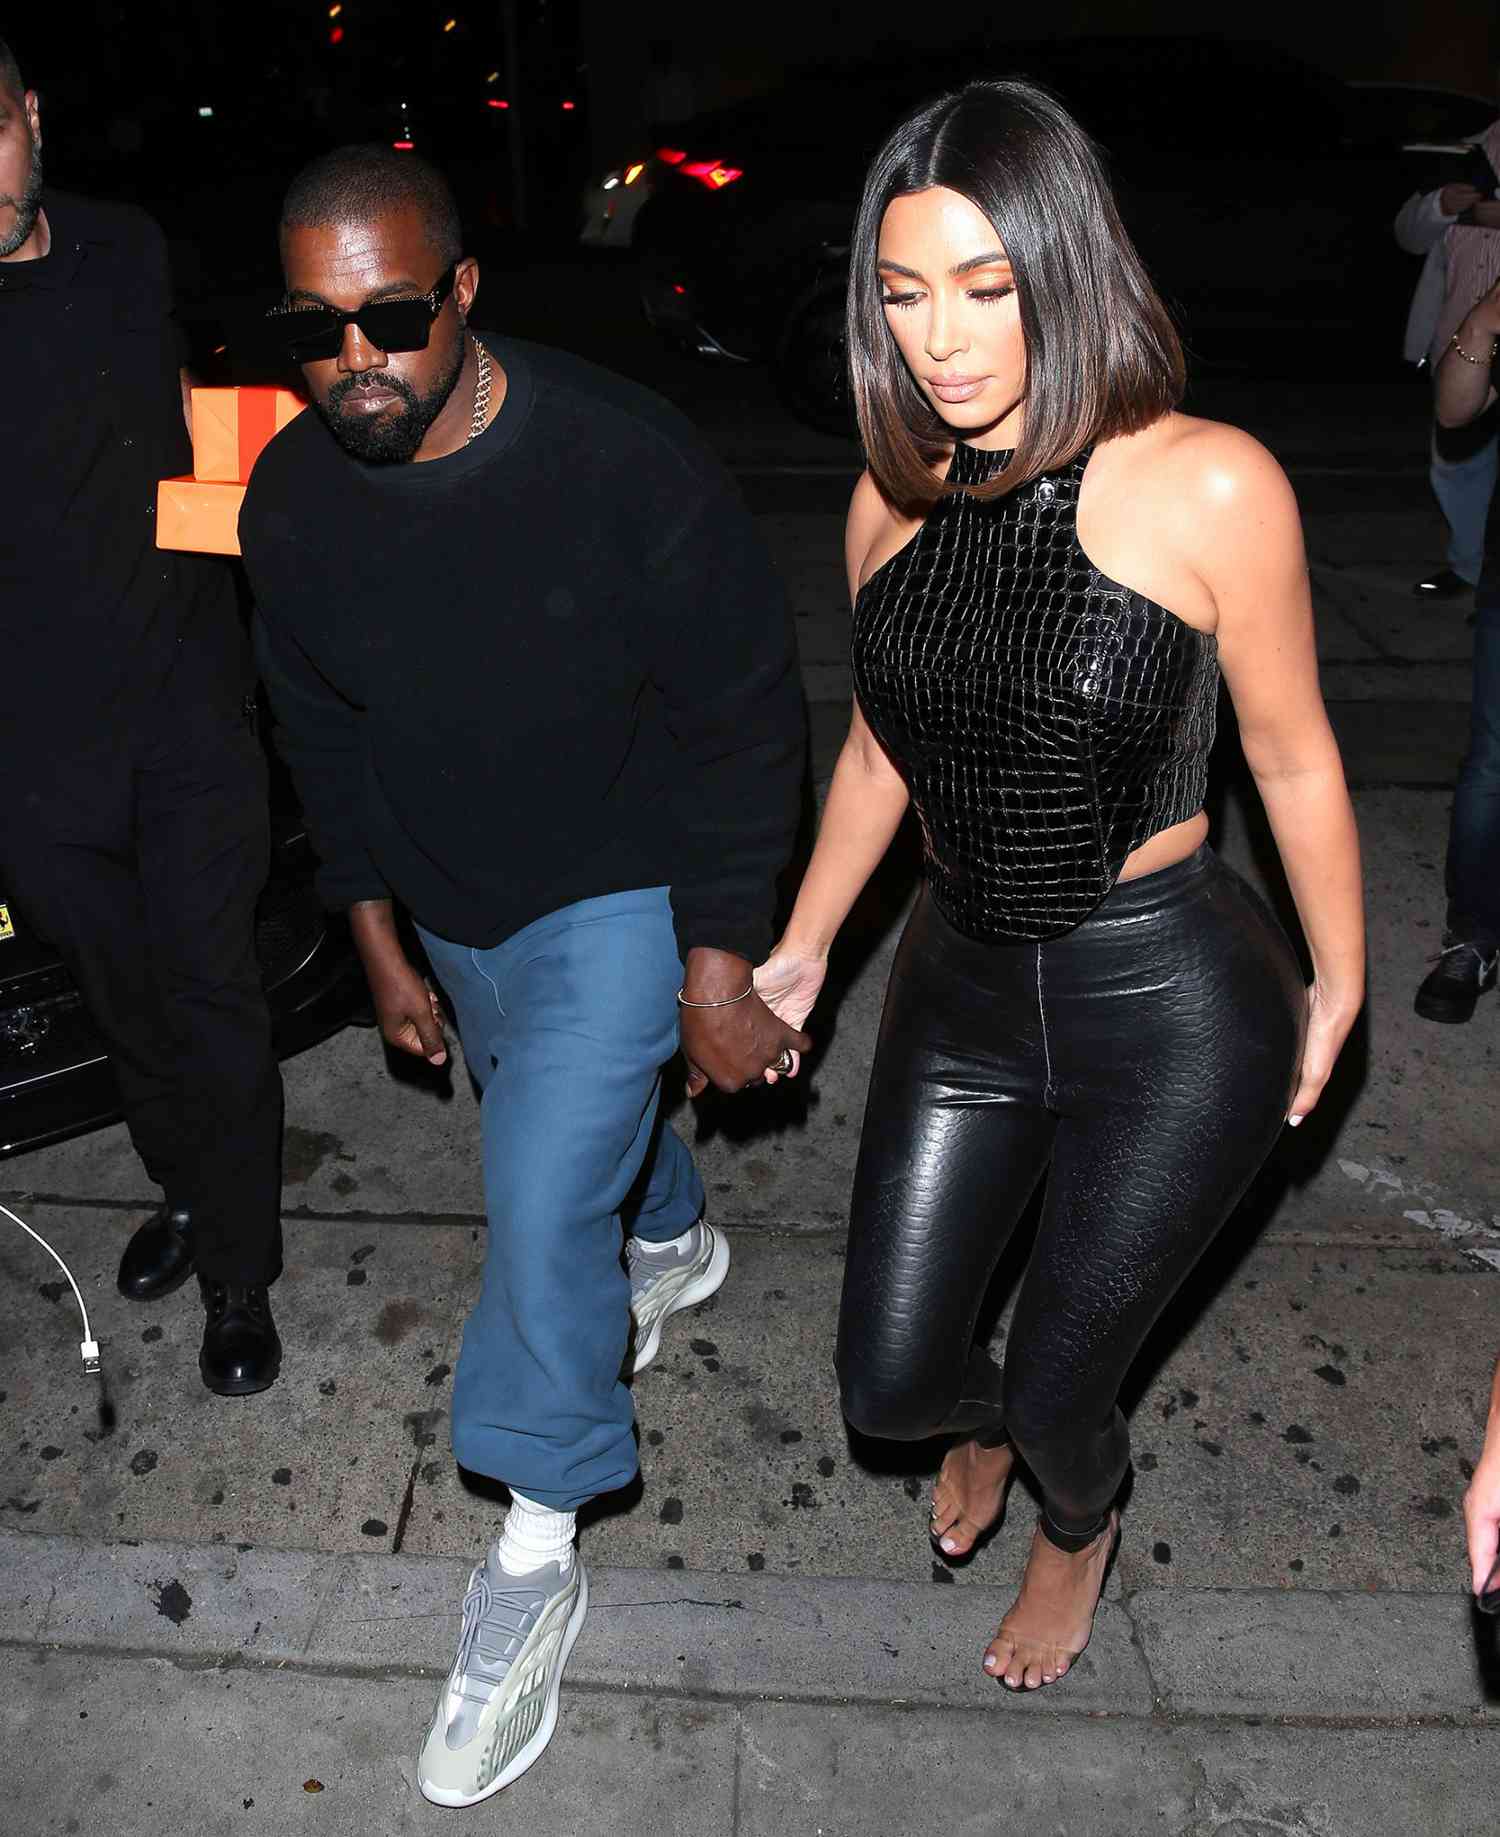 Kim Kardashian and Kanye West were seen arriving for dinner at 'Craigs' Restaurant in West Hollywood, CA